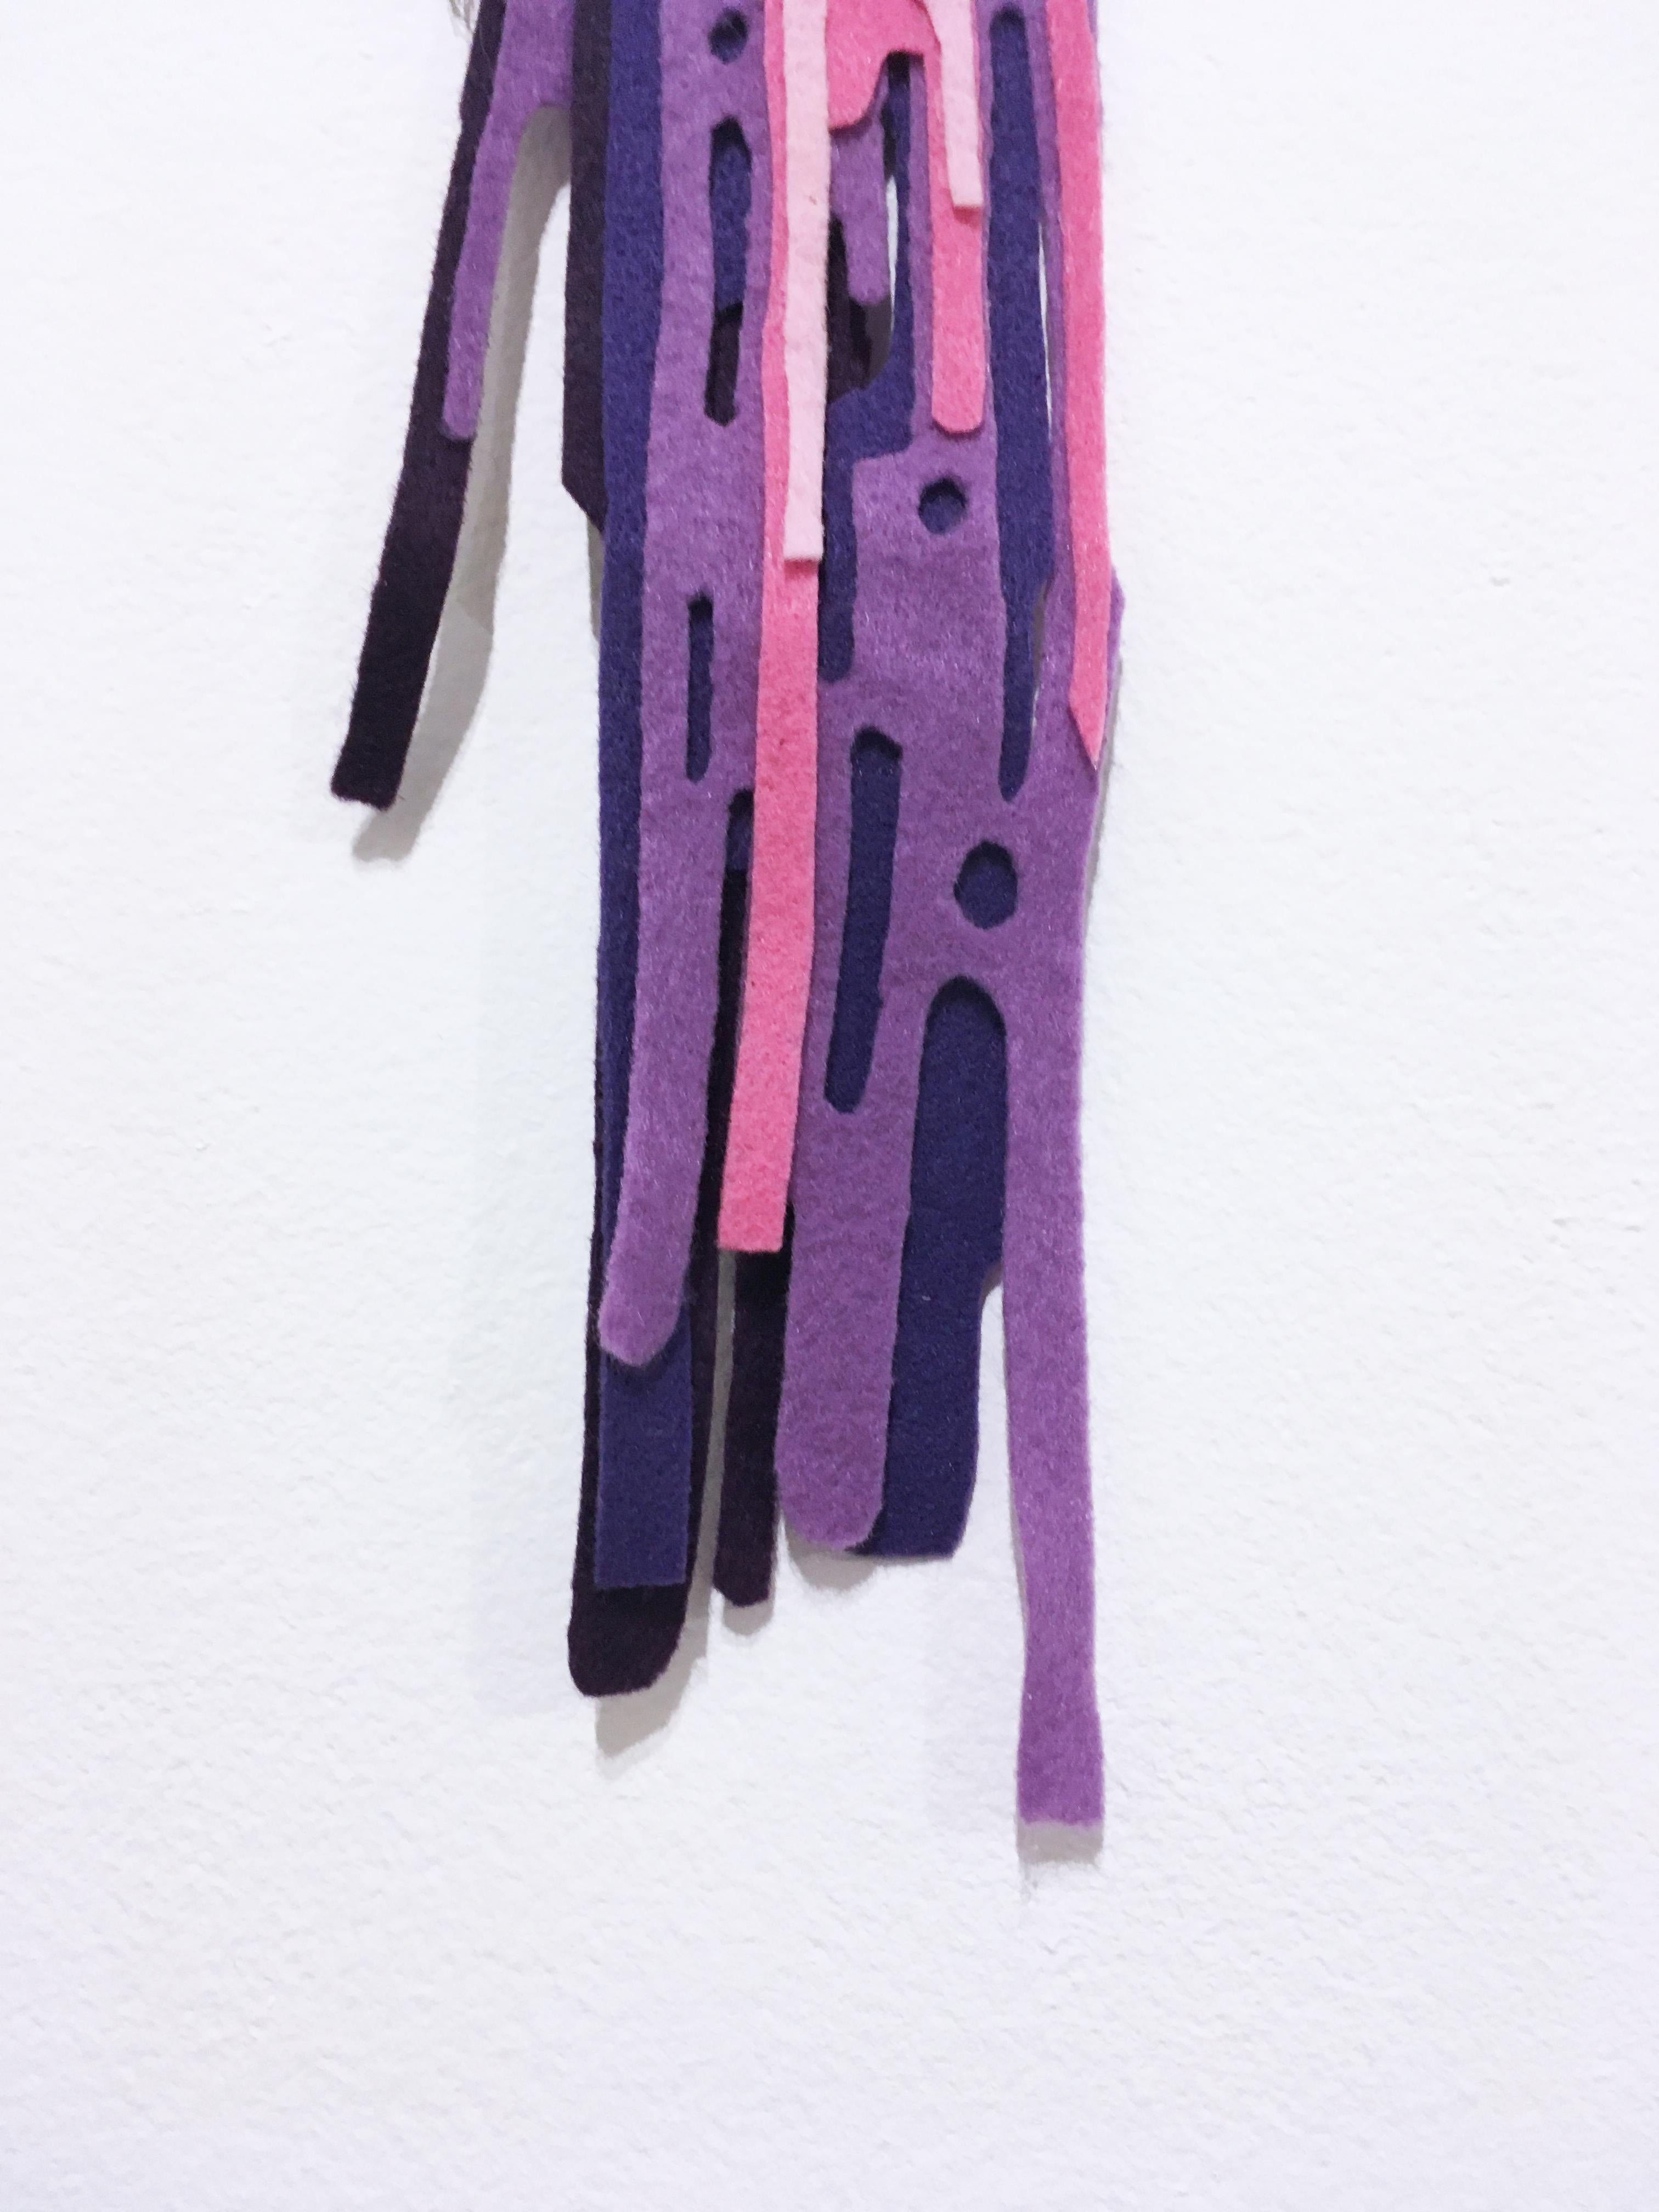 This truly unique piece is one of a kind, made in 2018 with a found object (paint brush), hand embellished with layered felt over acrylic paint in various shades of pink and purple, from light pink and fuschia to lavender and deep purple. This piece